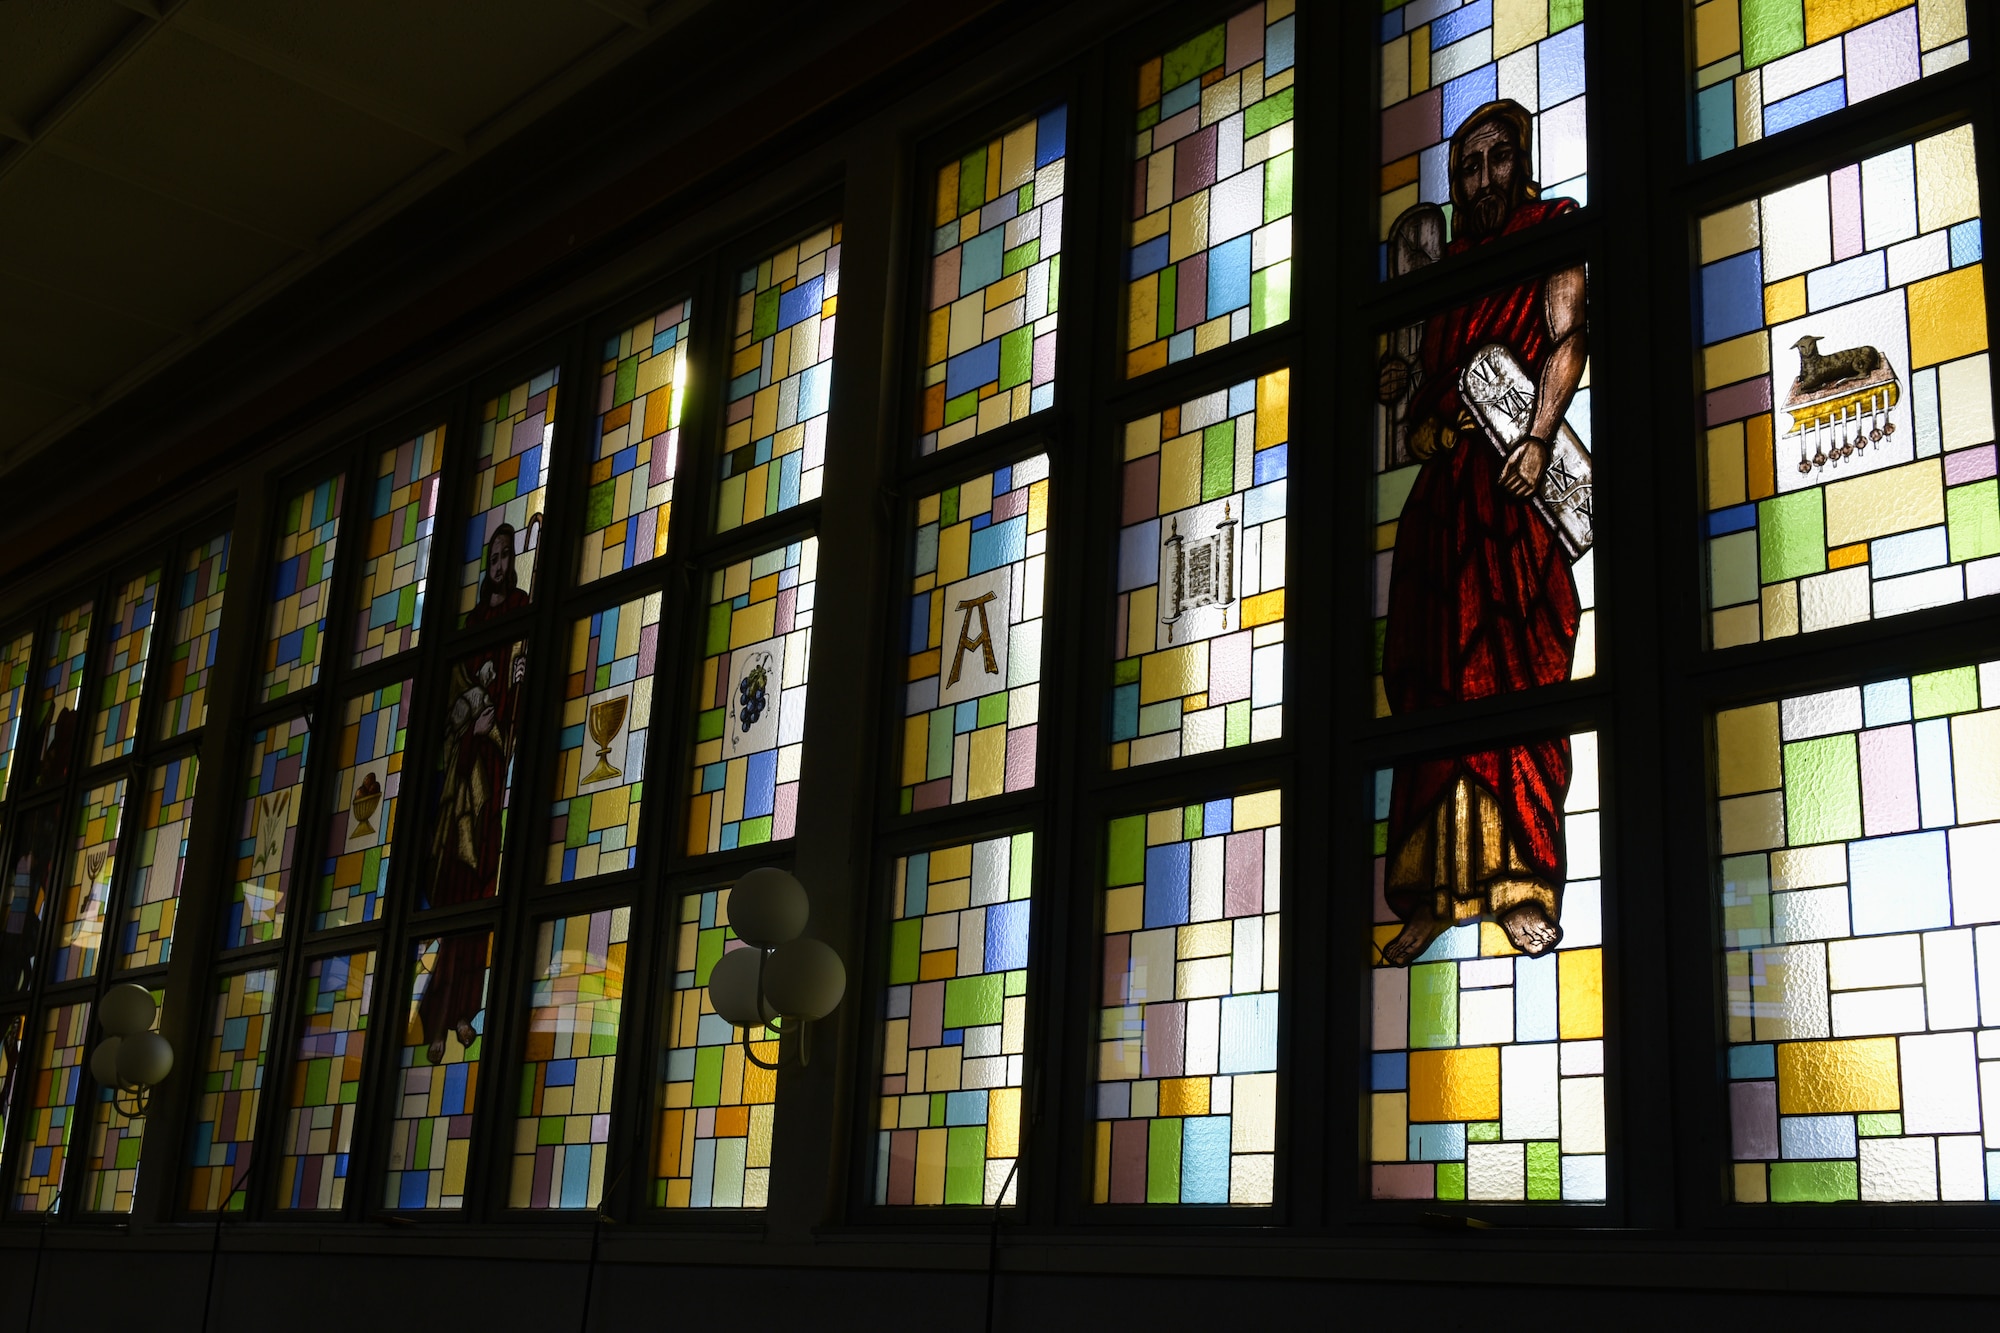 Image shows a stained glass window in a chapel, with images of Jesus on the glass.